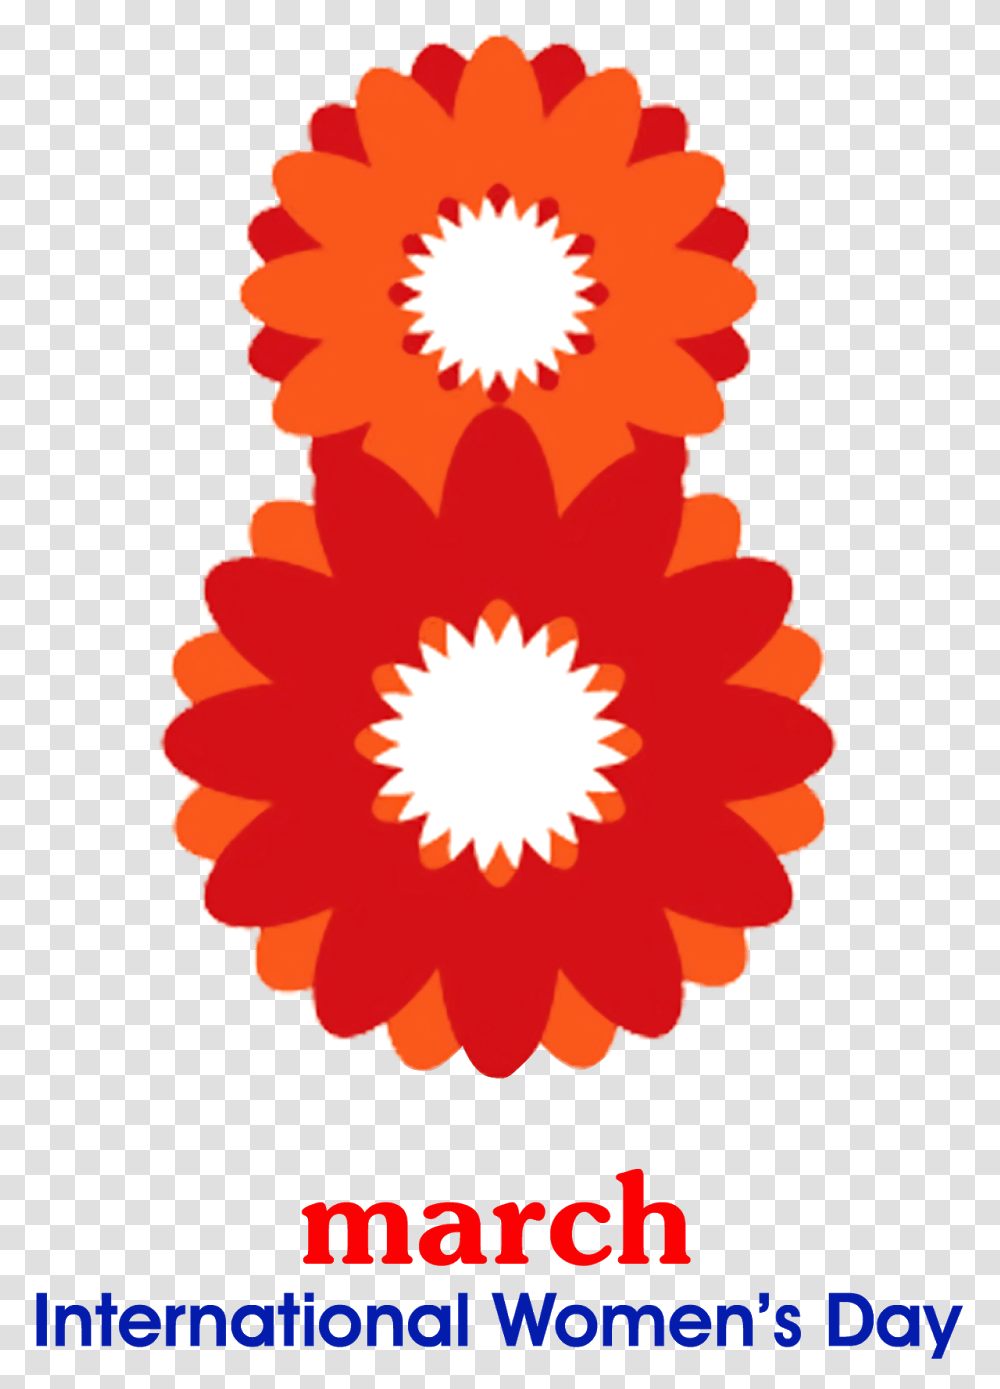 Happy Women's Day Images Backgound 8 March International Women's Day 2018, Plant, Flower, Outdoors, Daisy Transparent Png